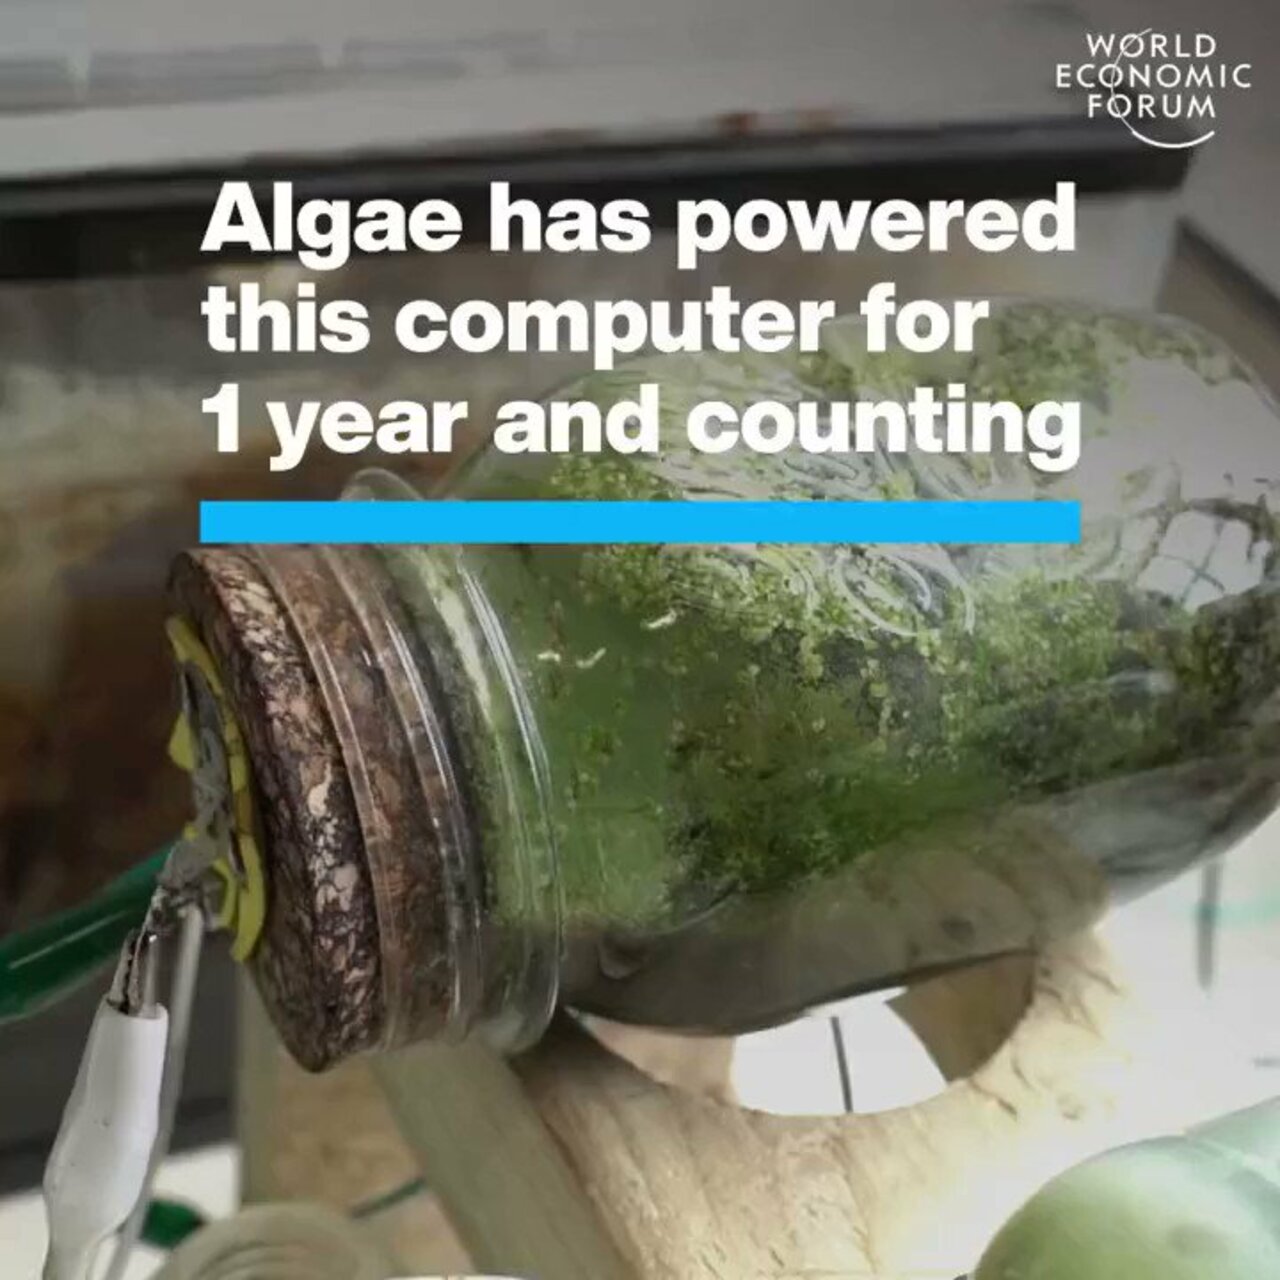 Algae has powered this computer for 1 year and counting by @Wef #AI #ArtificialIntelligence #Innovation #Sustainability #Renewables #CleanEnergy #Tech #Technology cc: @maxjcm @ronald_vanloon @pascal_bornet @marcusborba https://t.co/VeBgUpjvni